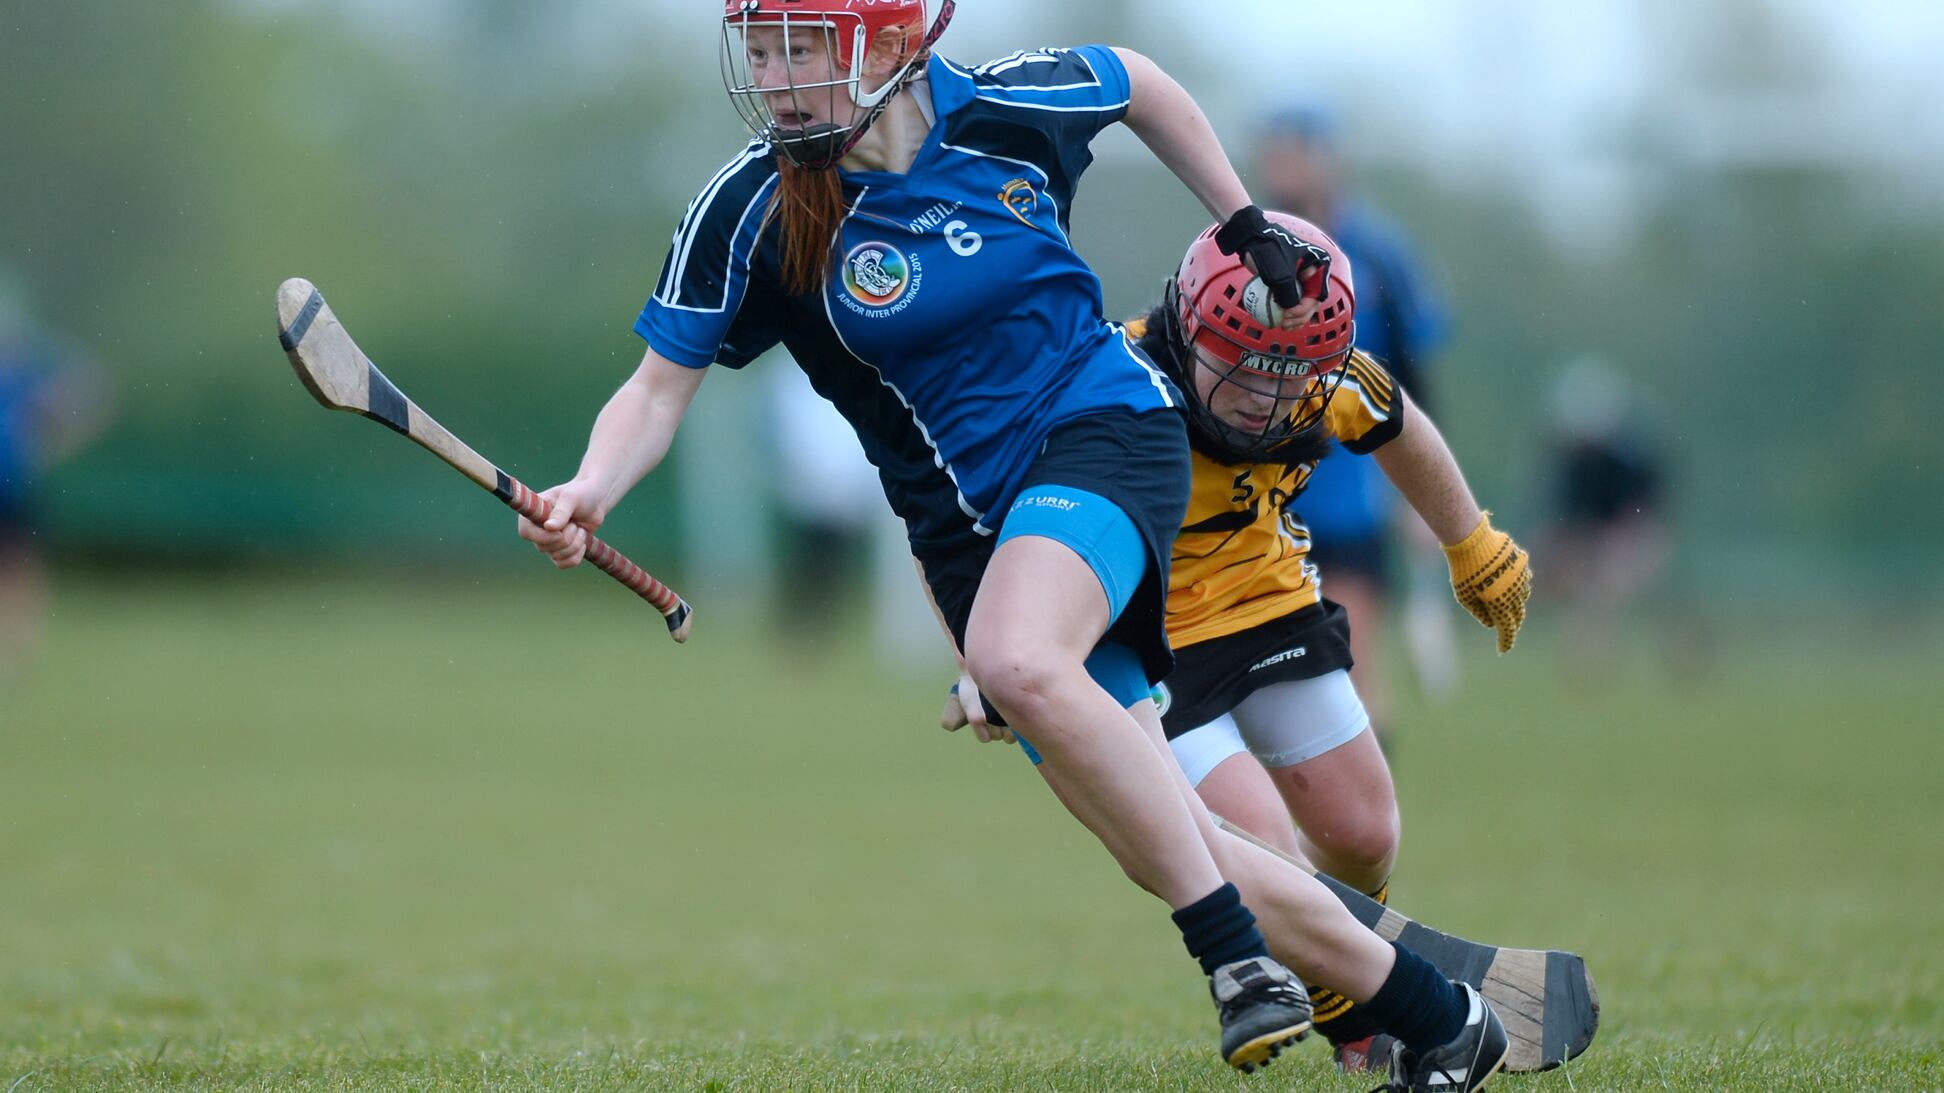 Beth Carton was on target for Waterford in their win over Meath last weekend &nbsp;